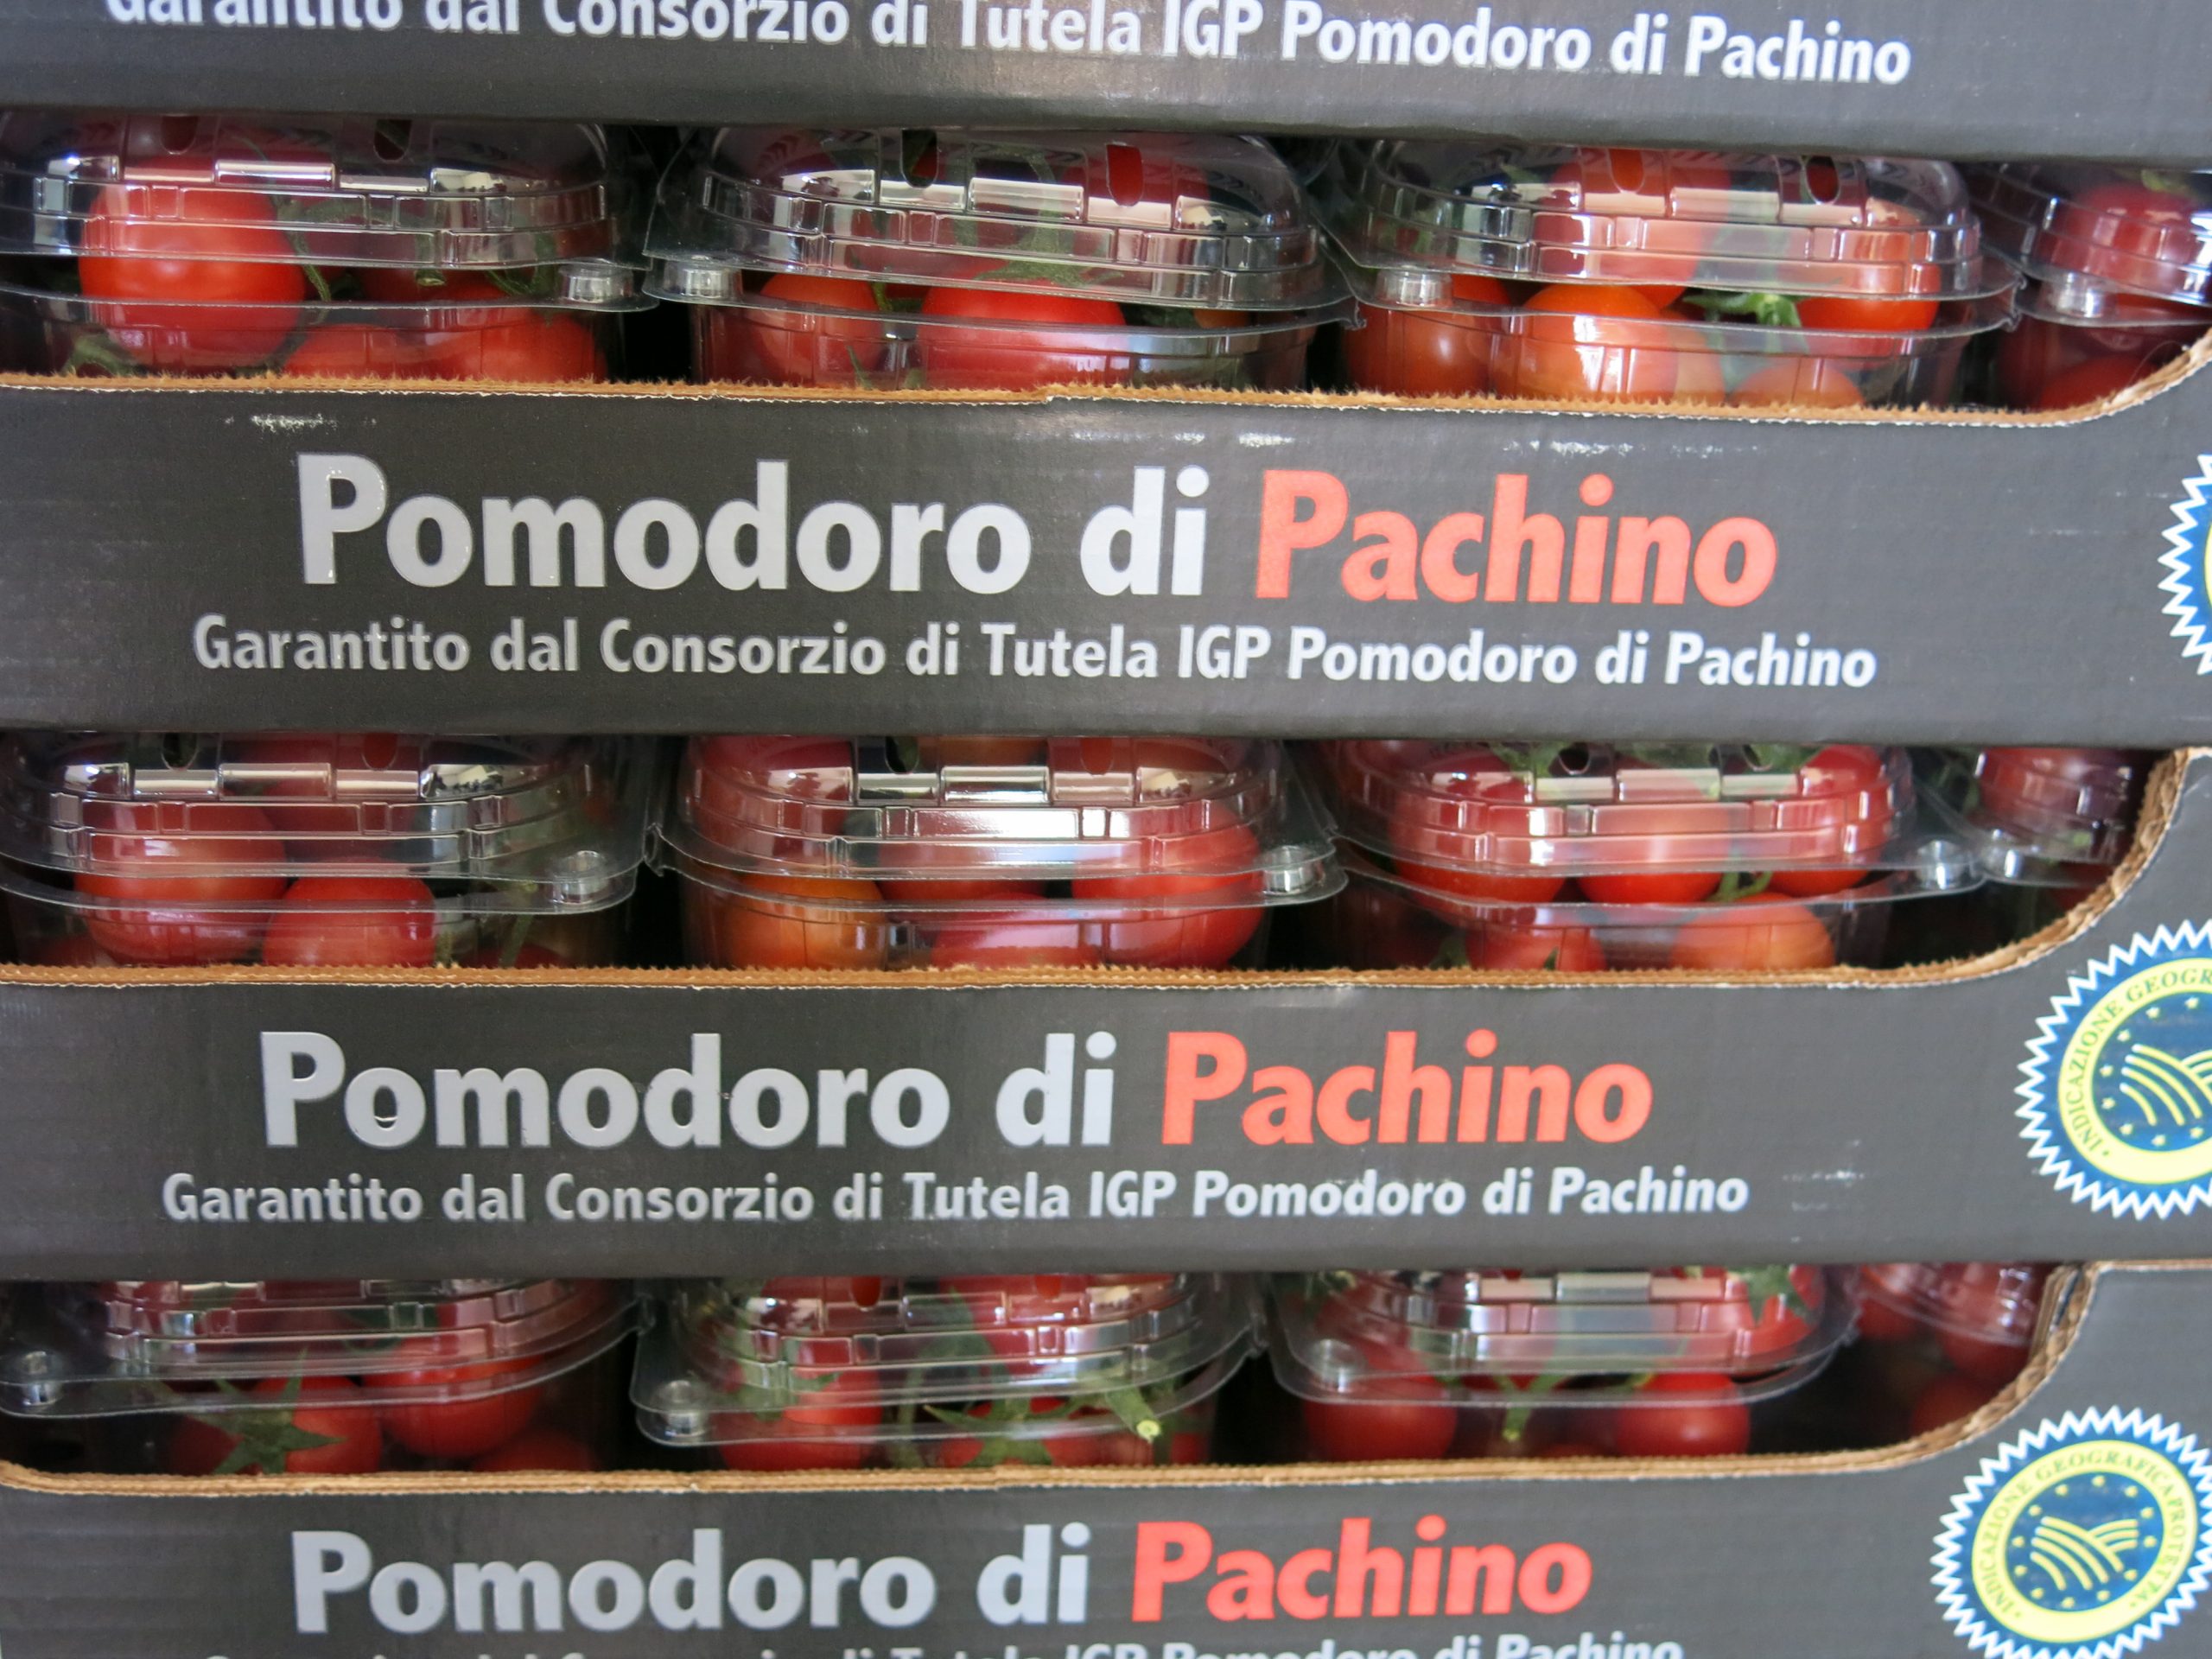 Launched in 2015, the Pach.Ita brand brings added value to the top-quality segment grown in Sicily.